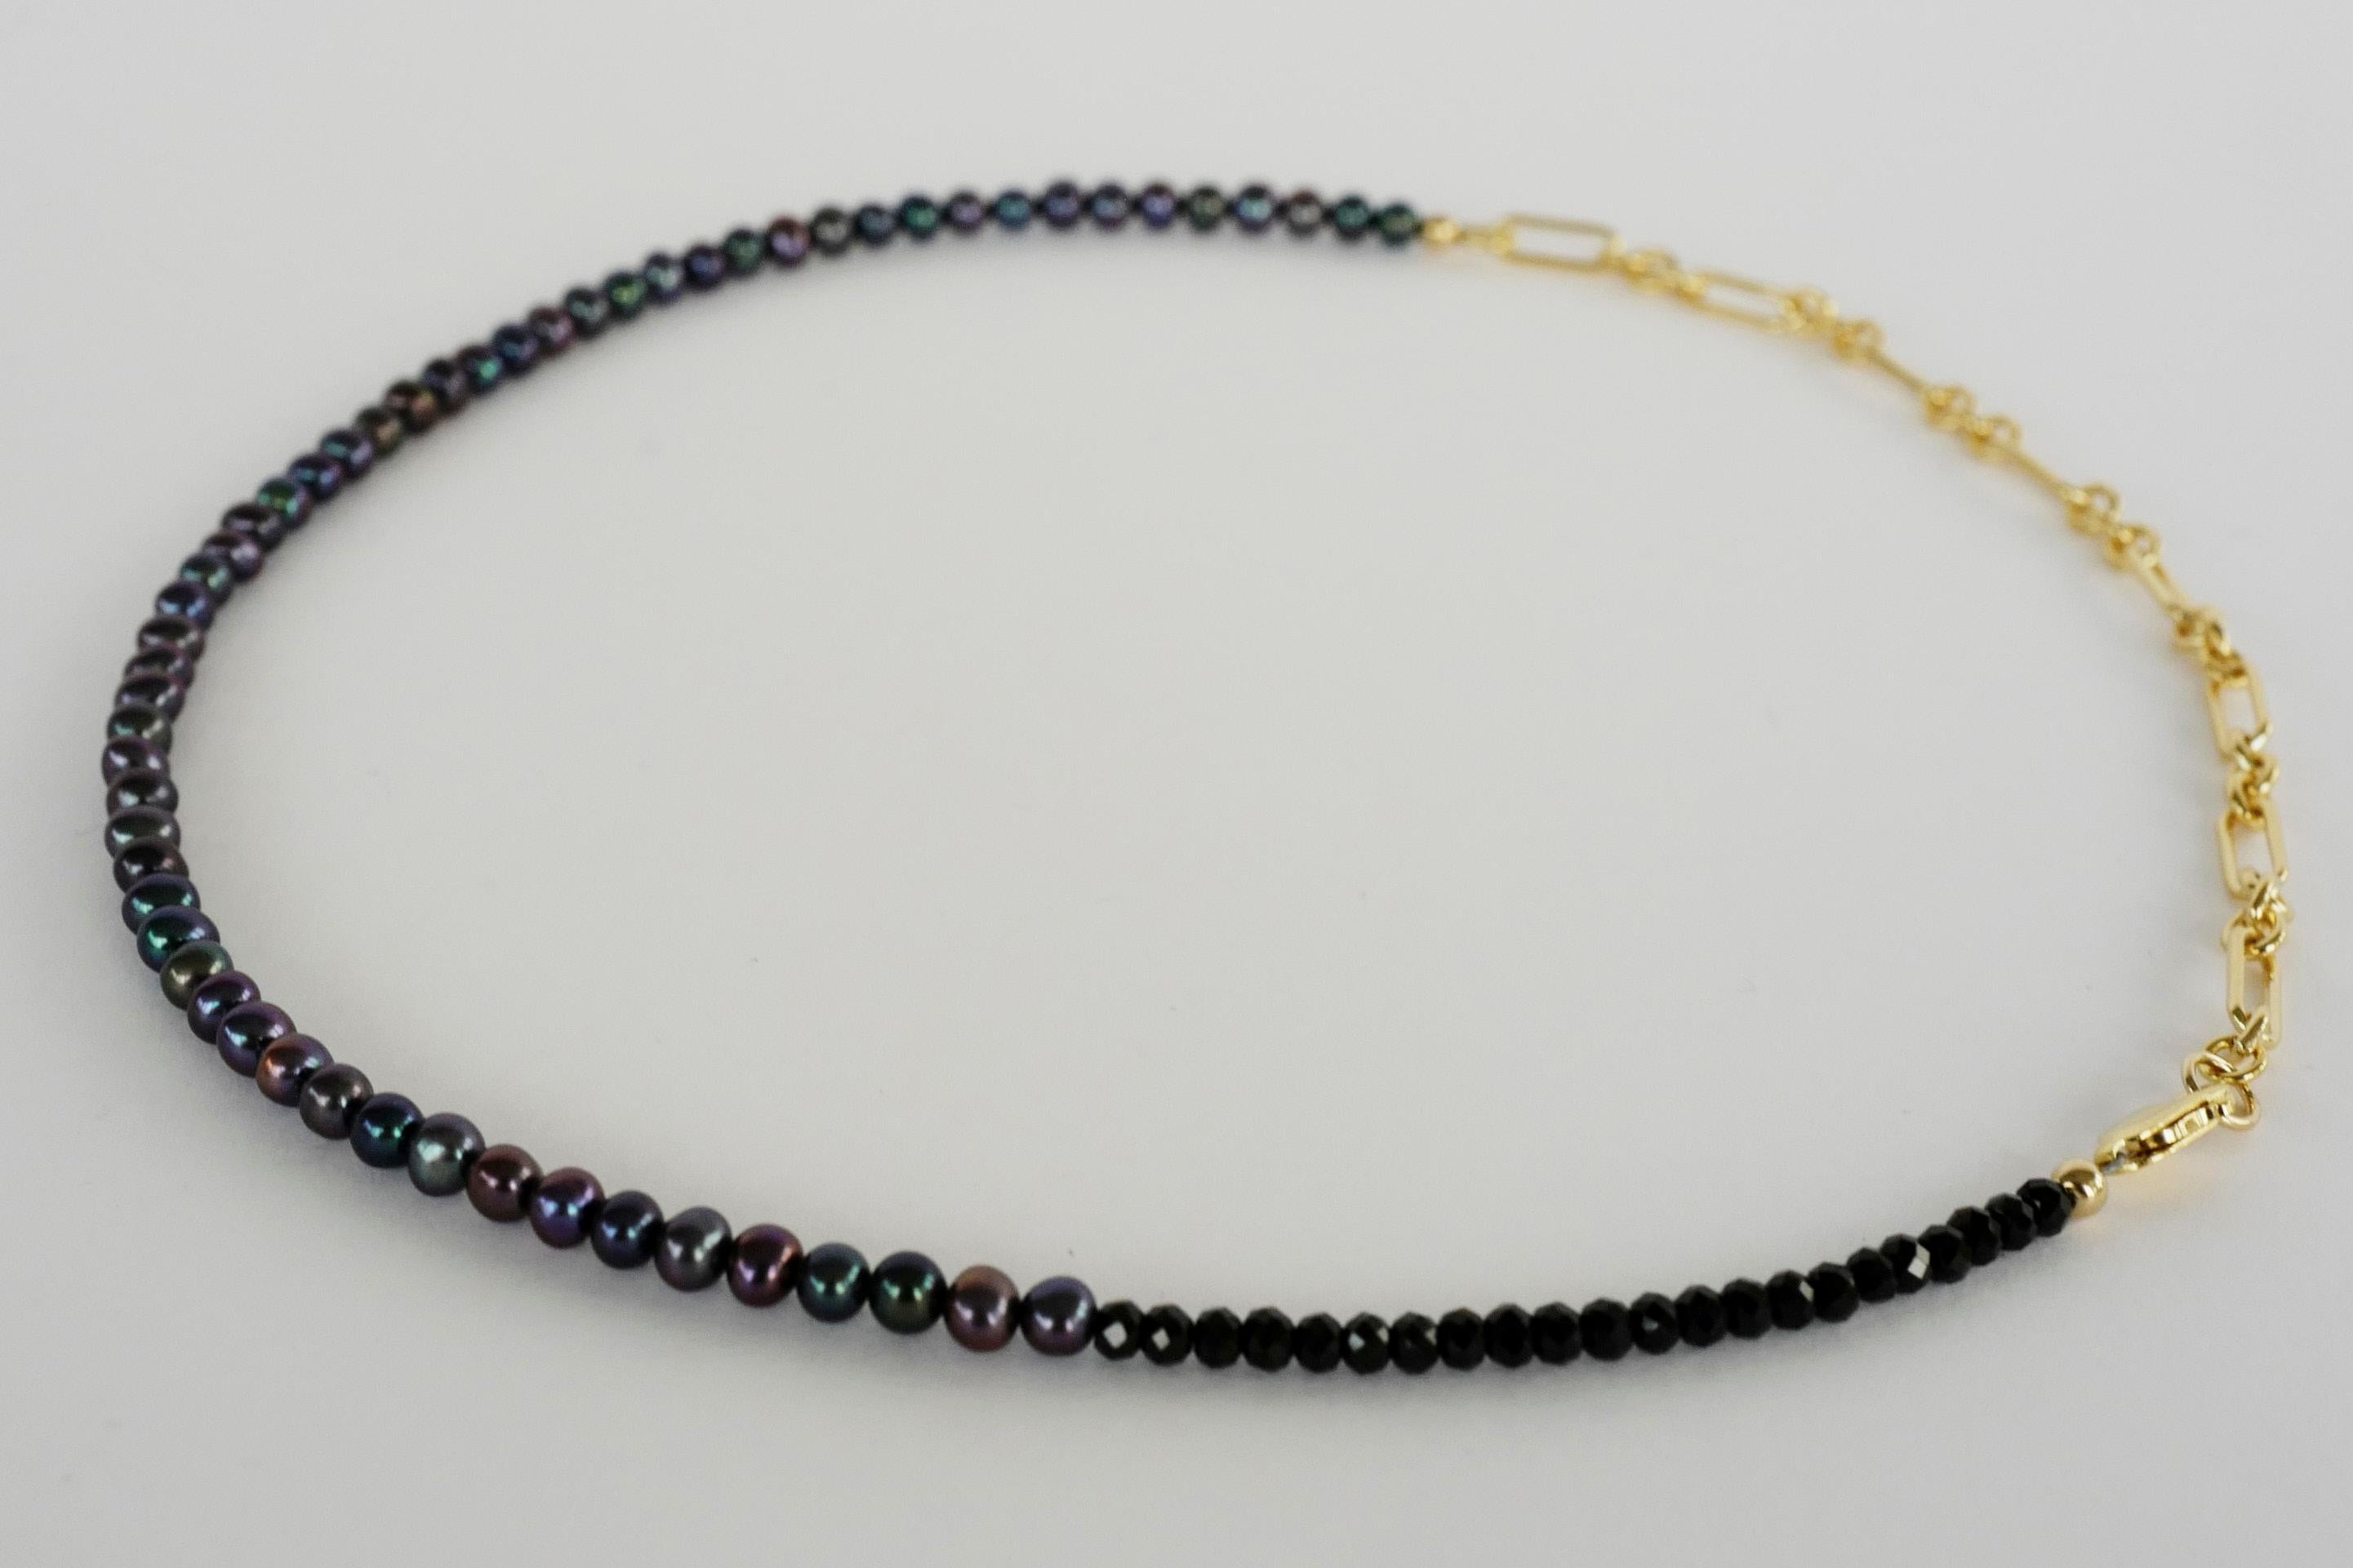 Round Cut Black Pearl Beaded Choker Necklace Black Spinel Gold Filled Chain J Dauphin